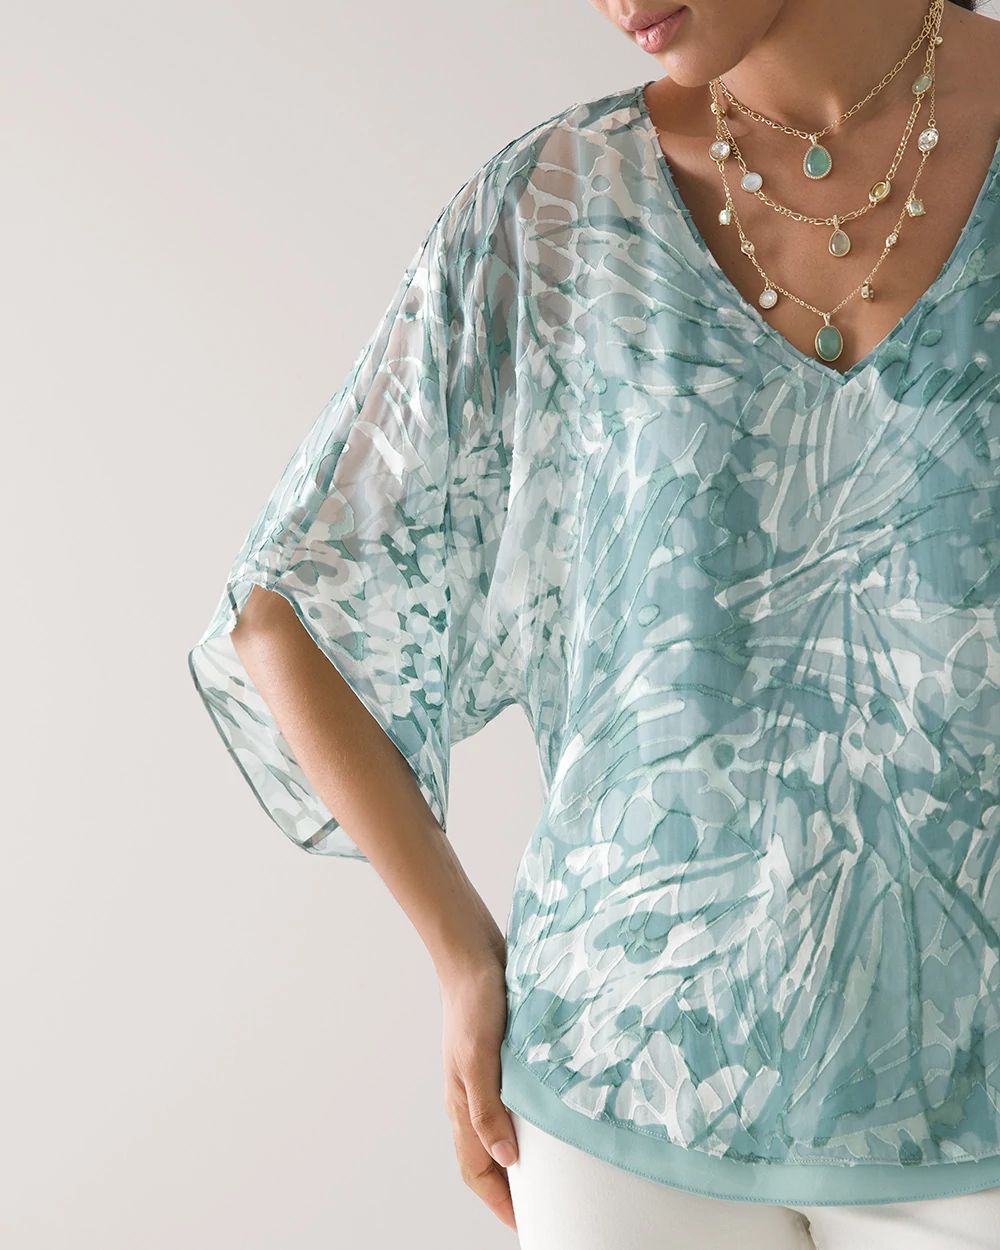 Butterfly Print Silk Burnout Kimono Top click to view larger image.